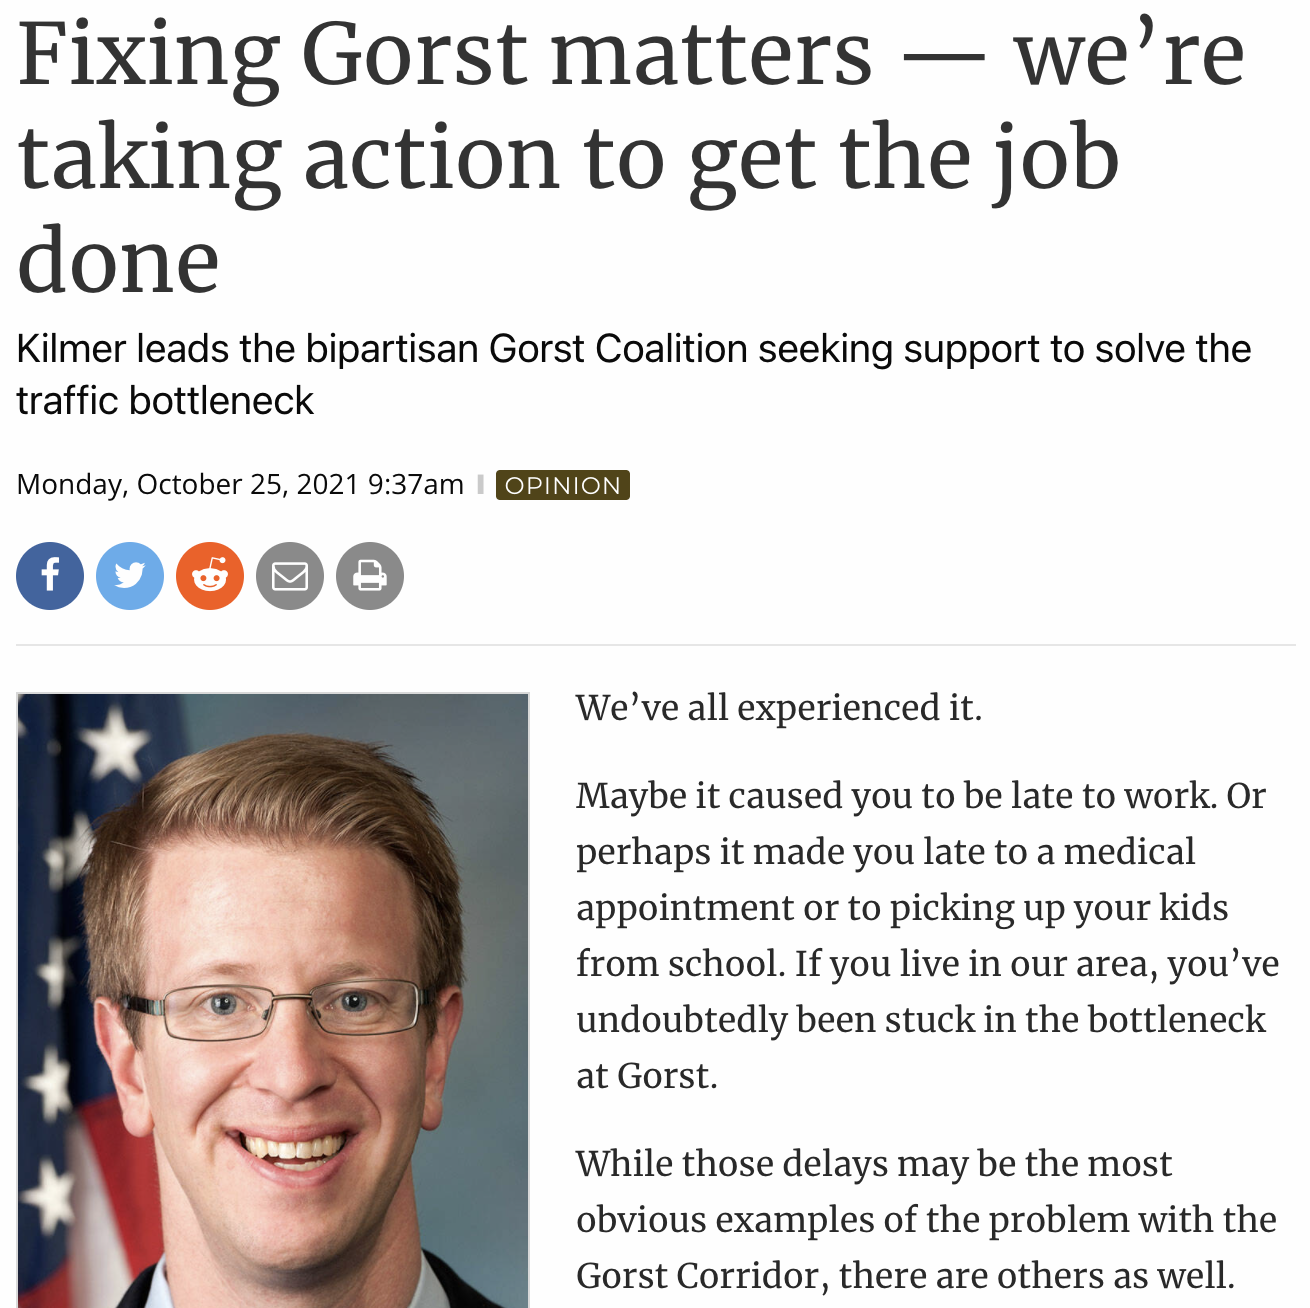 Fixing Gorst matters — we’re taking action to get the job done